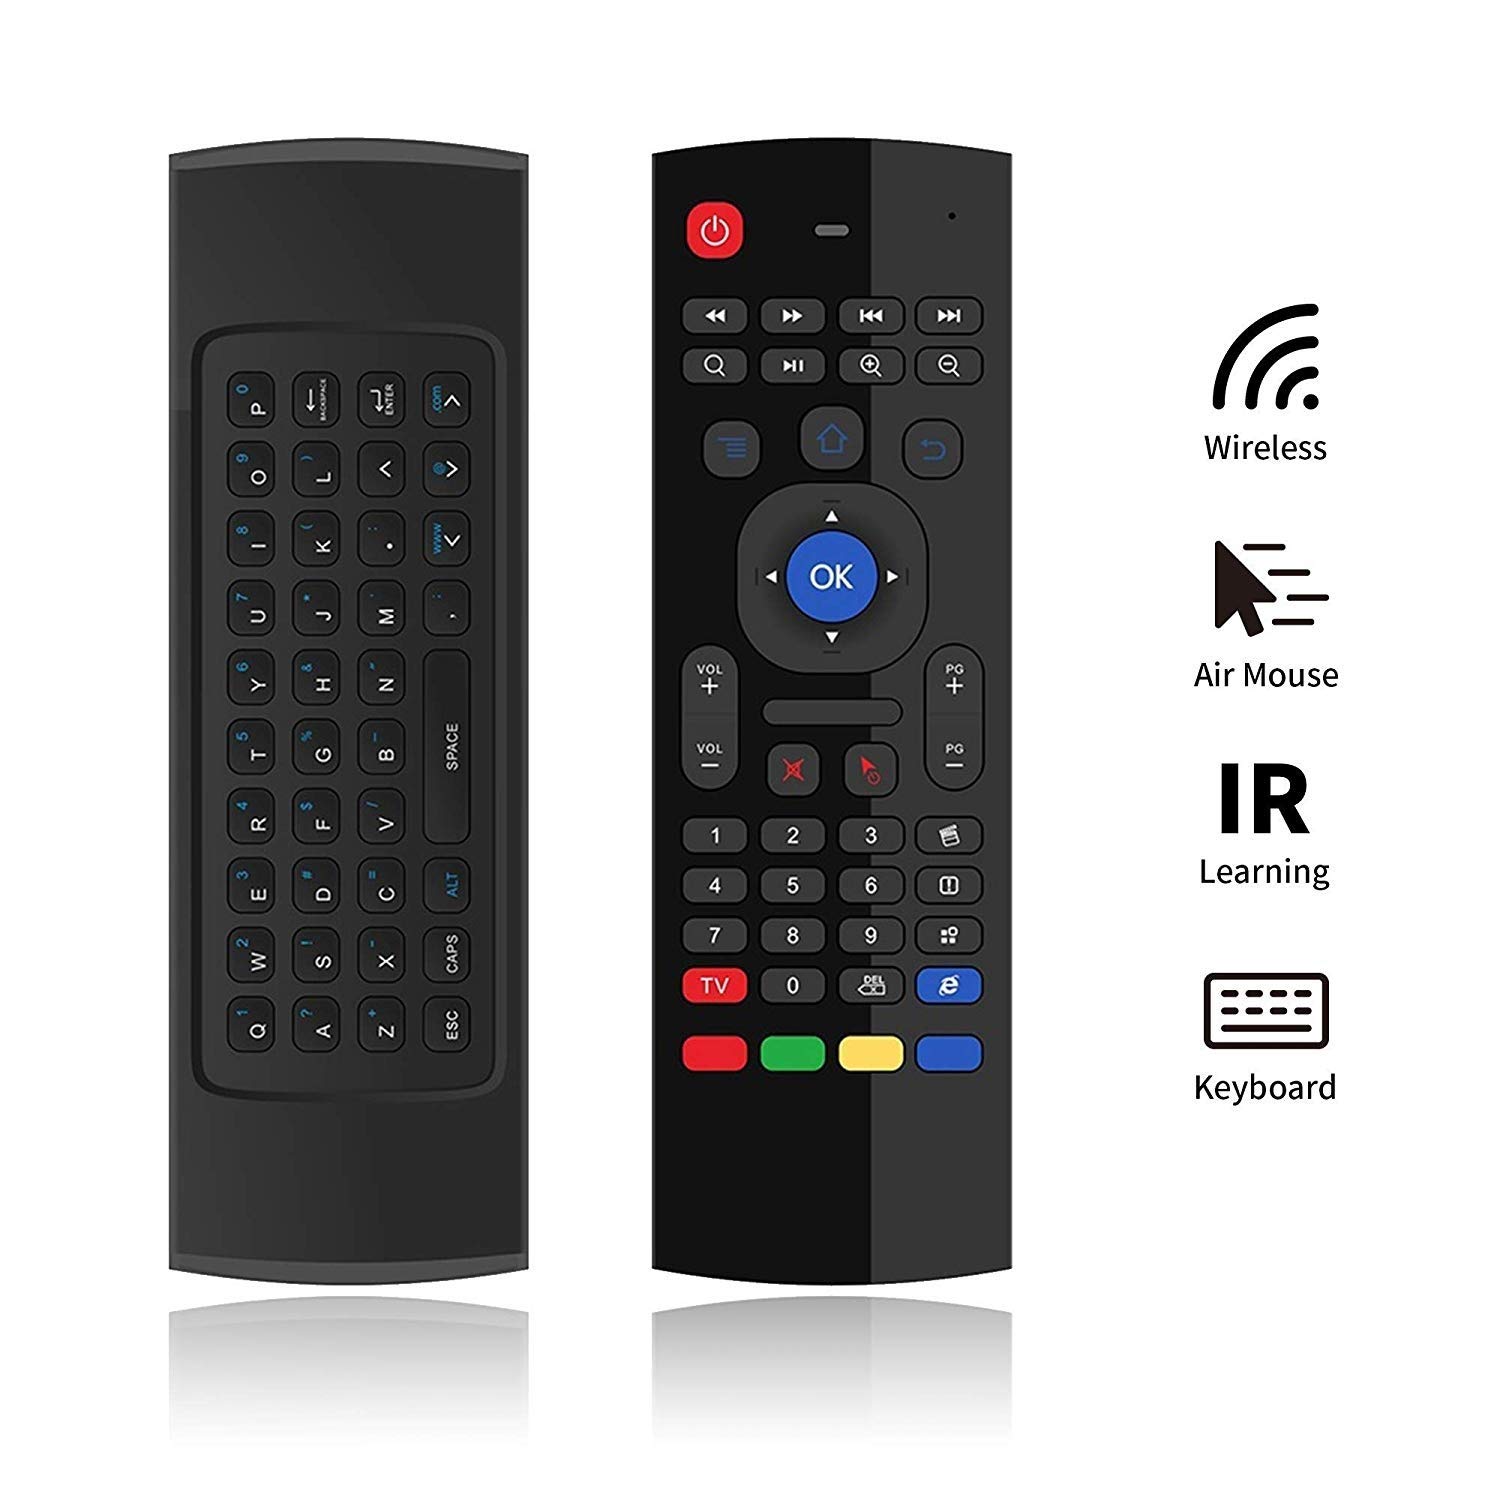 Favormates Air Remote Mouse MX3 Pro,2.4G Backlit Kodi Remote Control,Mini Wireless Keyboard & Infrared Remote Control Learning, Best for Android Smart Tv Box HTPC IPTV PC Pad Xbox Raspberry pi 3